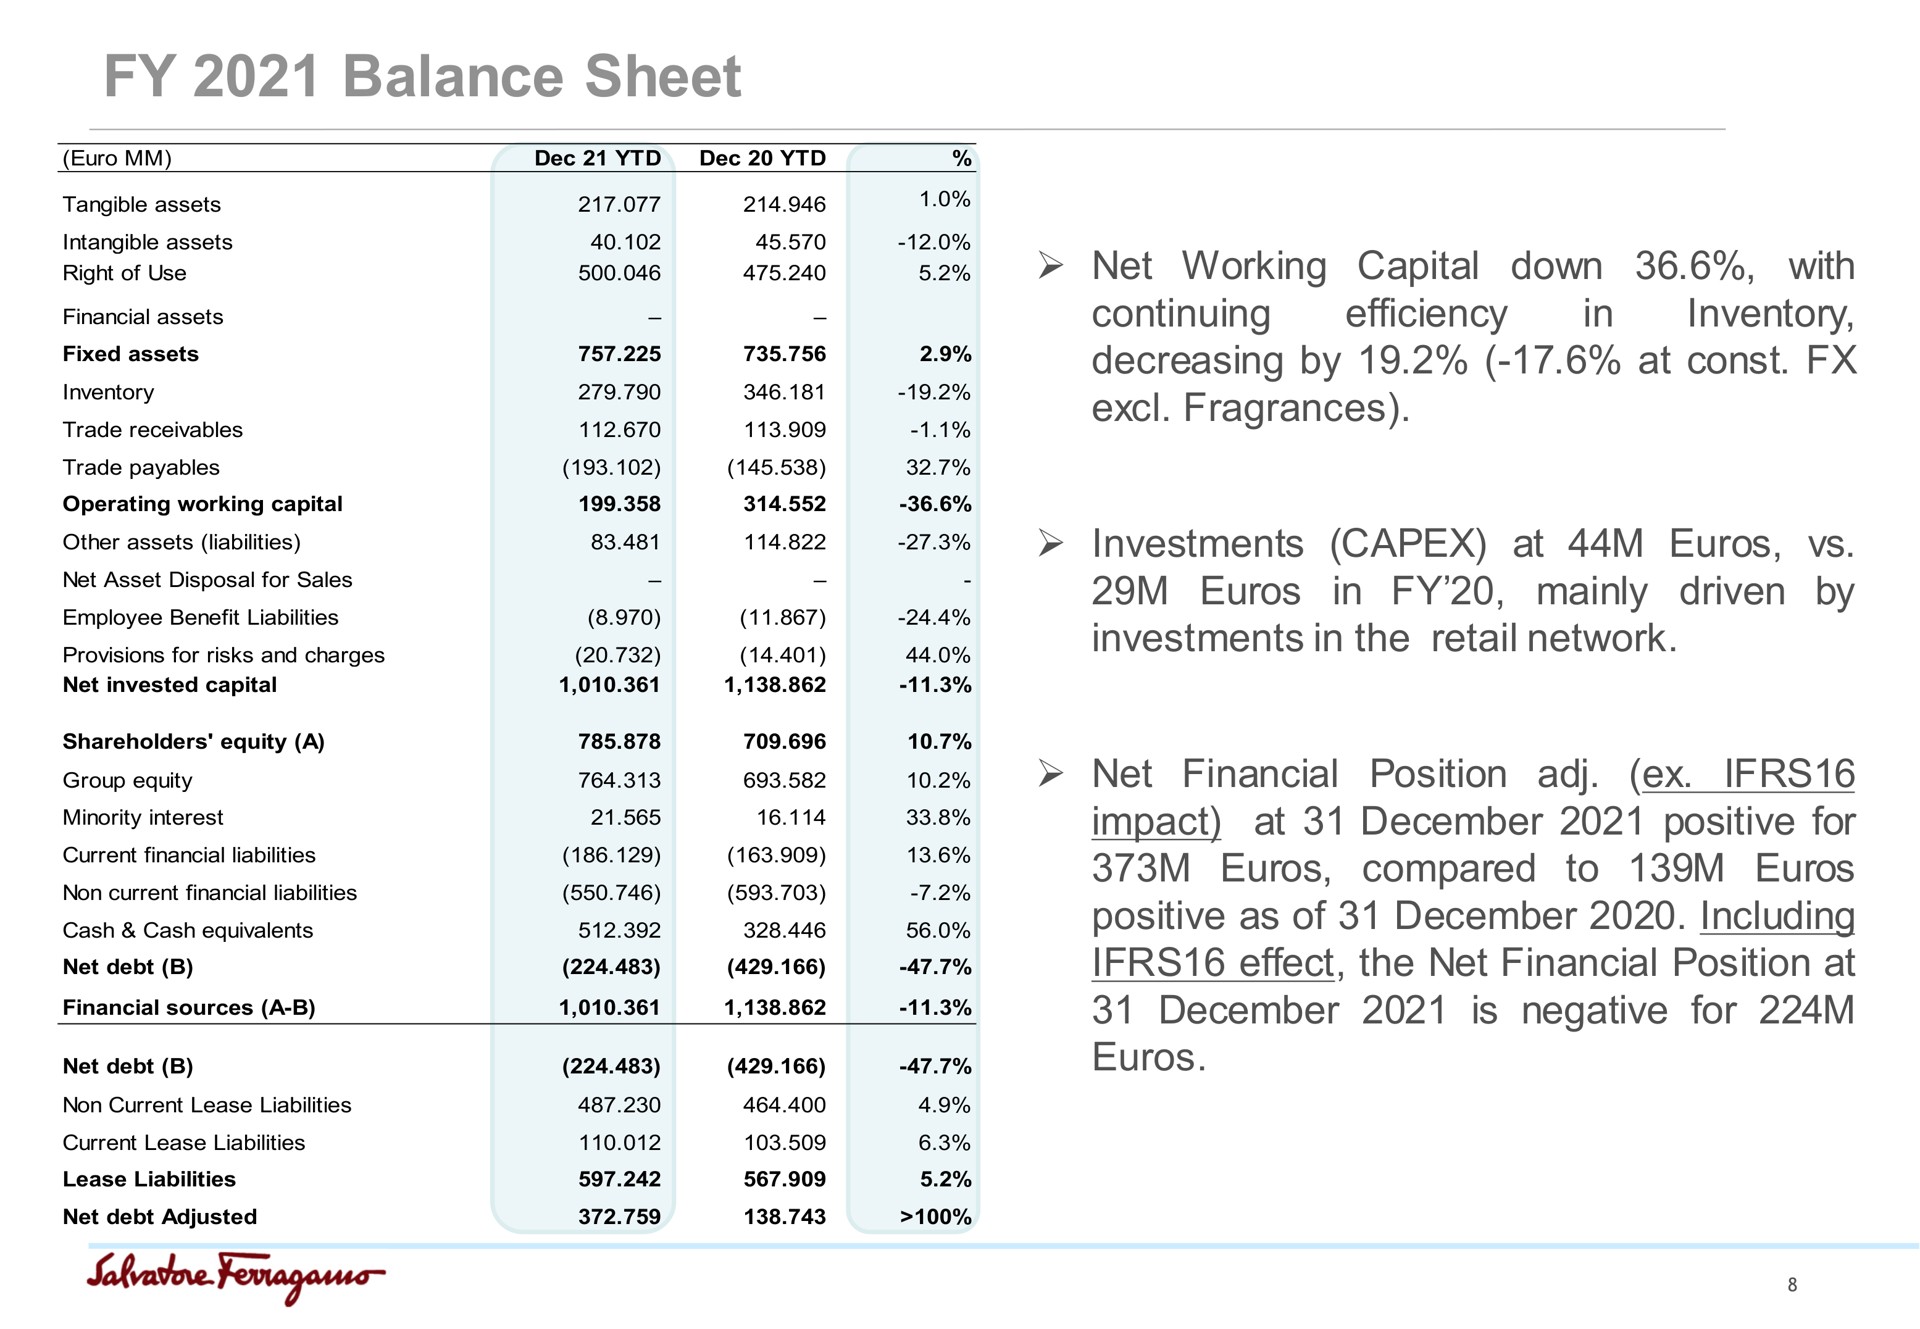 balance sheet net working capital down with inventory continuing efficiency decreasing by at fragrances in investments at in mainly driven by investments in the retail network net financial position impact at positive for compared to positive as of including effect the net financial position at is negative for | Salvatore Ferragamo